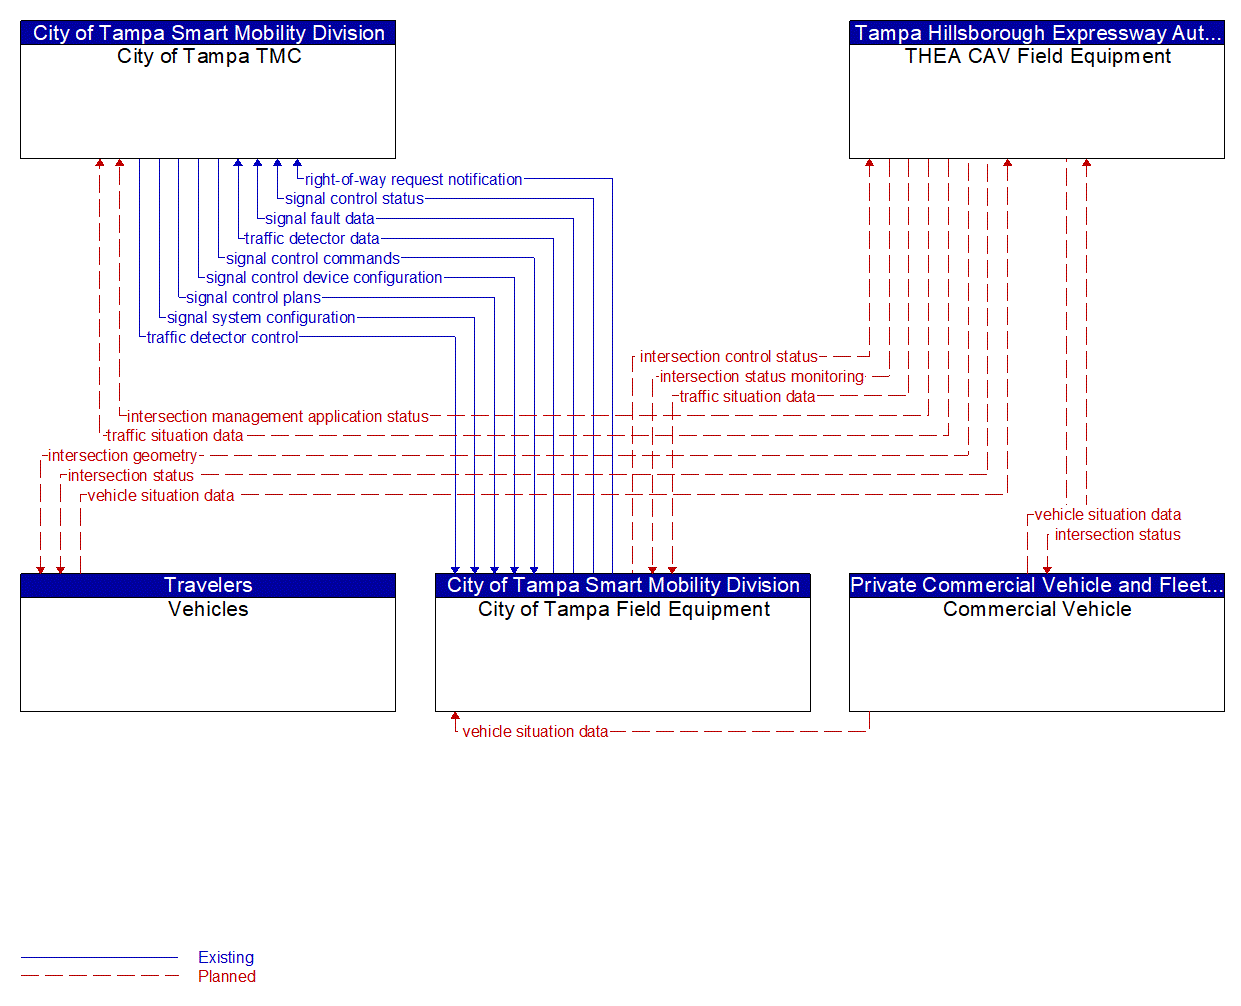 Service Graphic: Connected Vehicle Traffic Signal System (THEA CV Pilot)